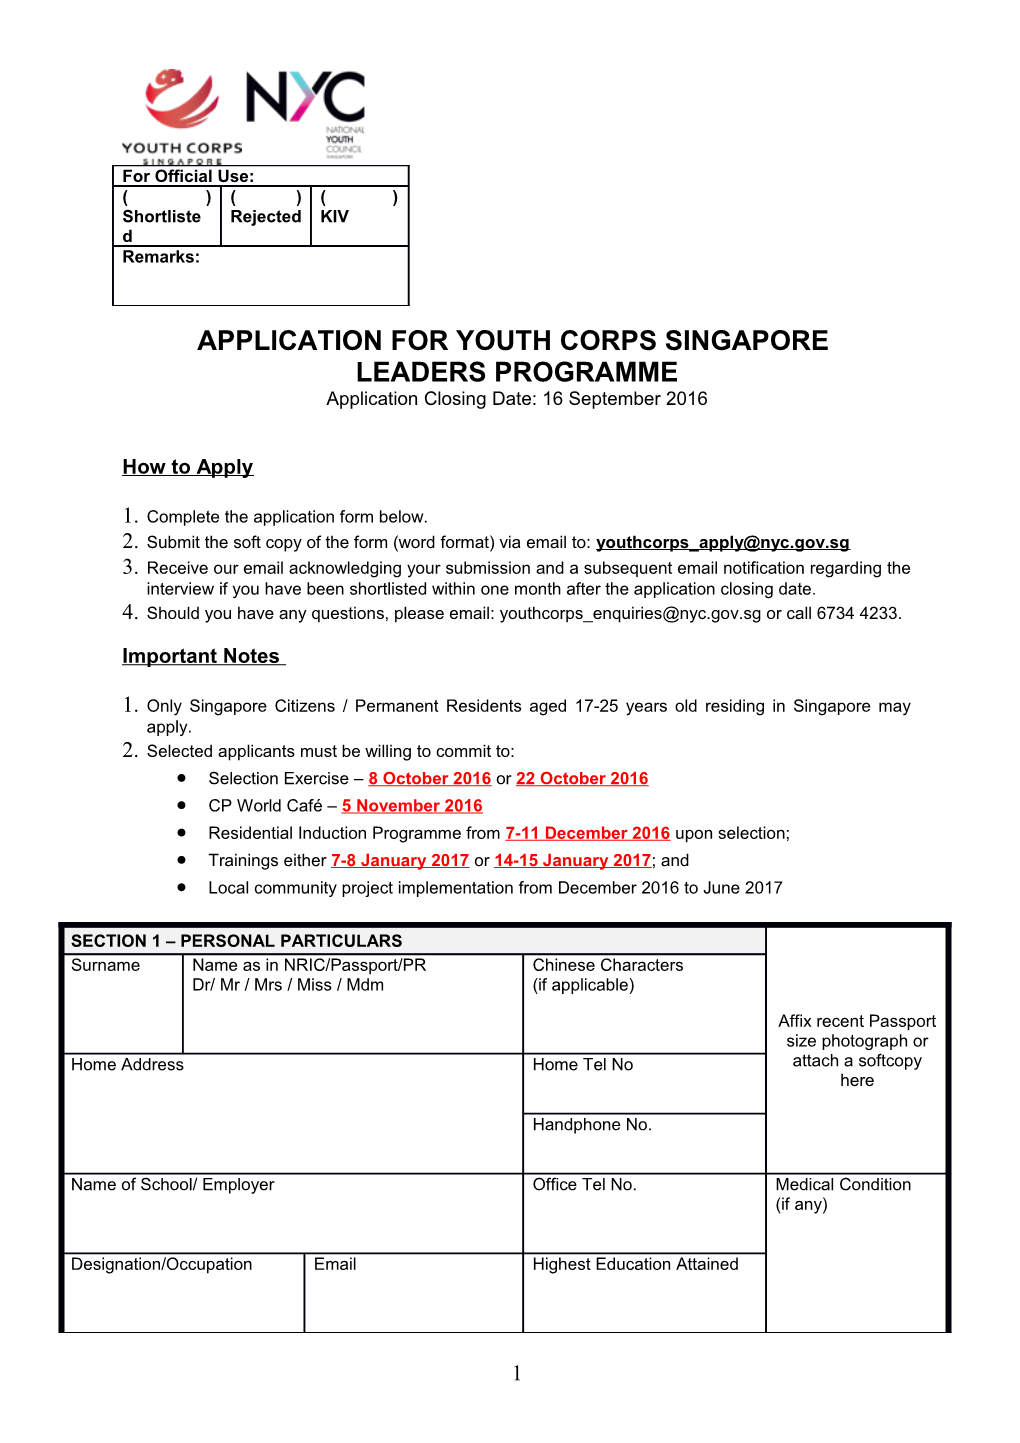 Application for Youth Corps Singapore